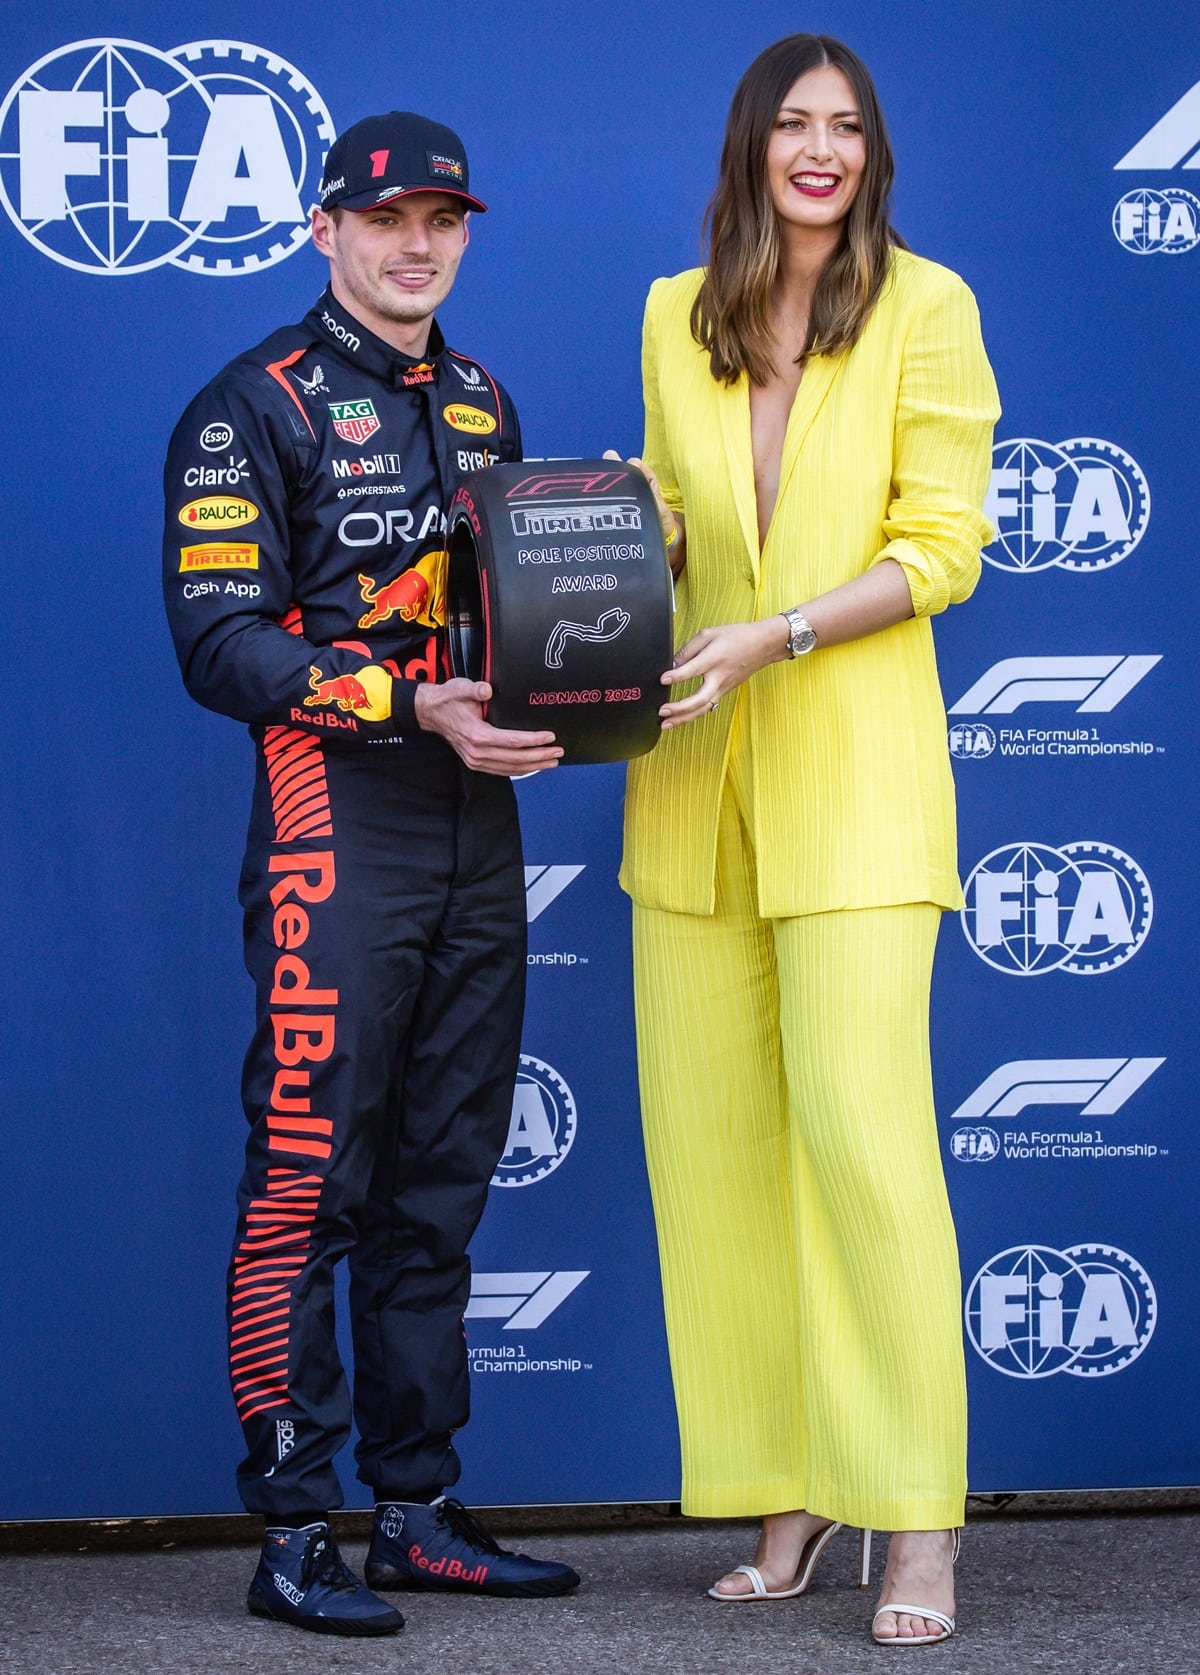 Max Verstappen, with a height of 5' 11